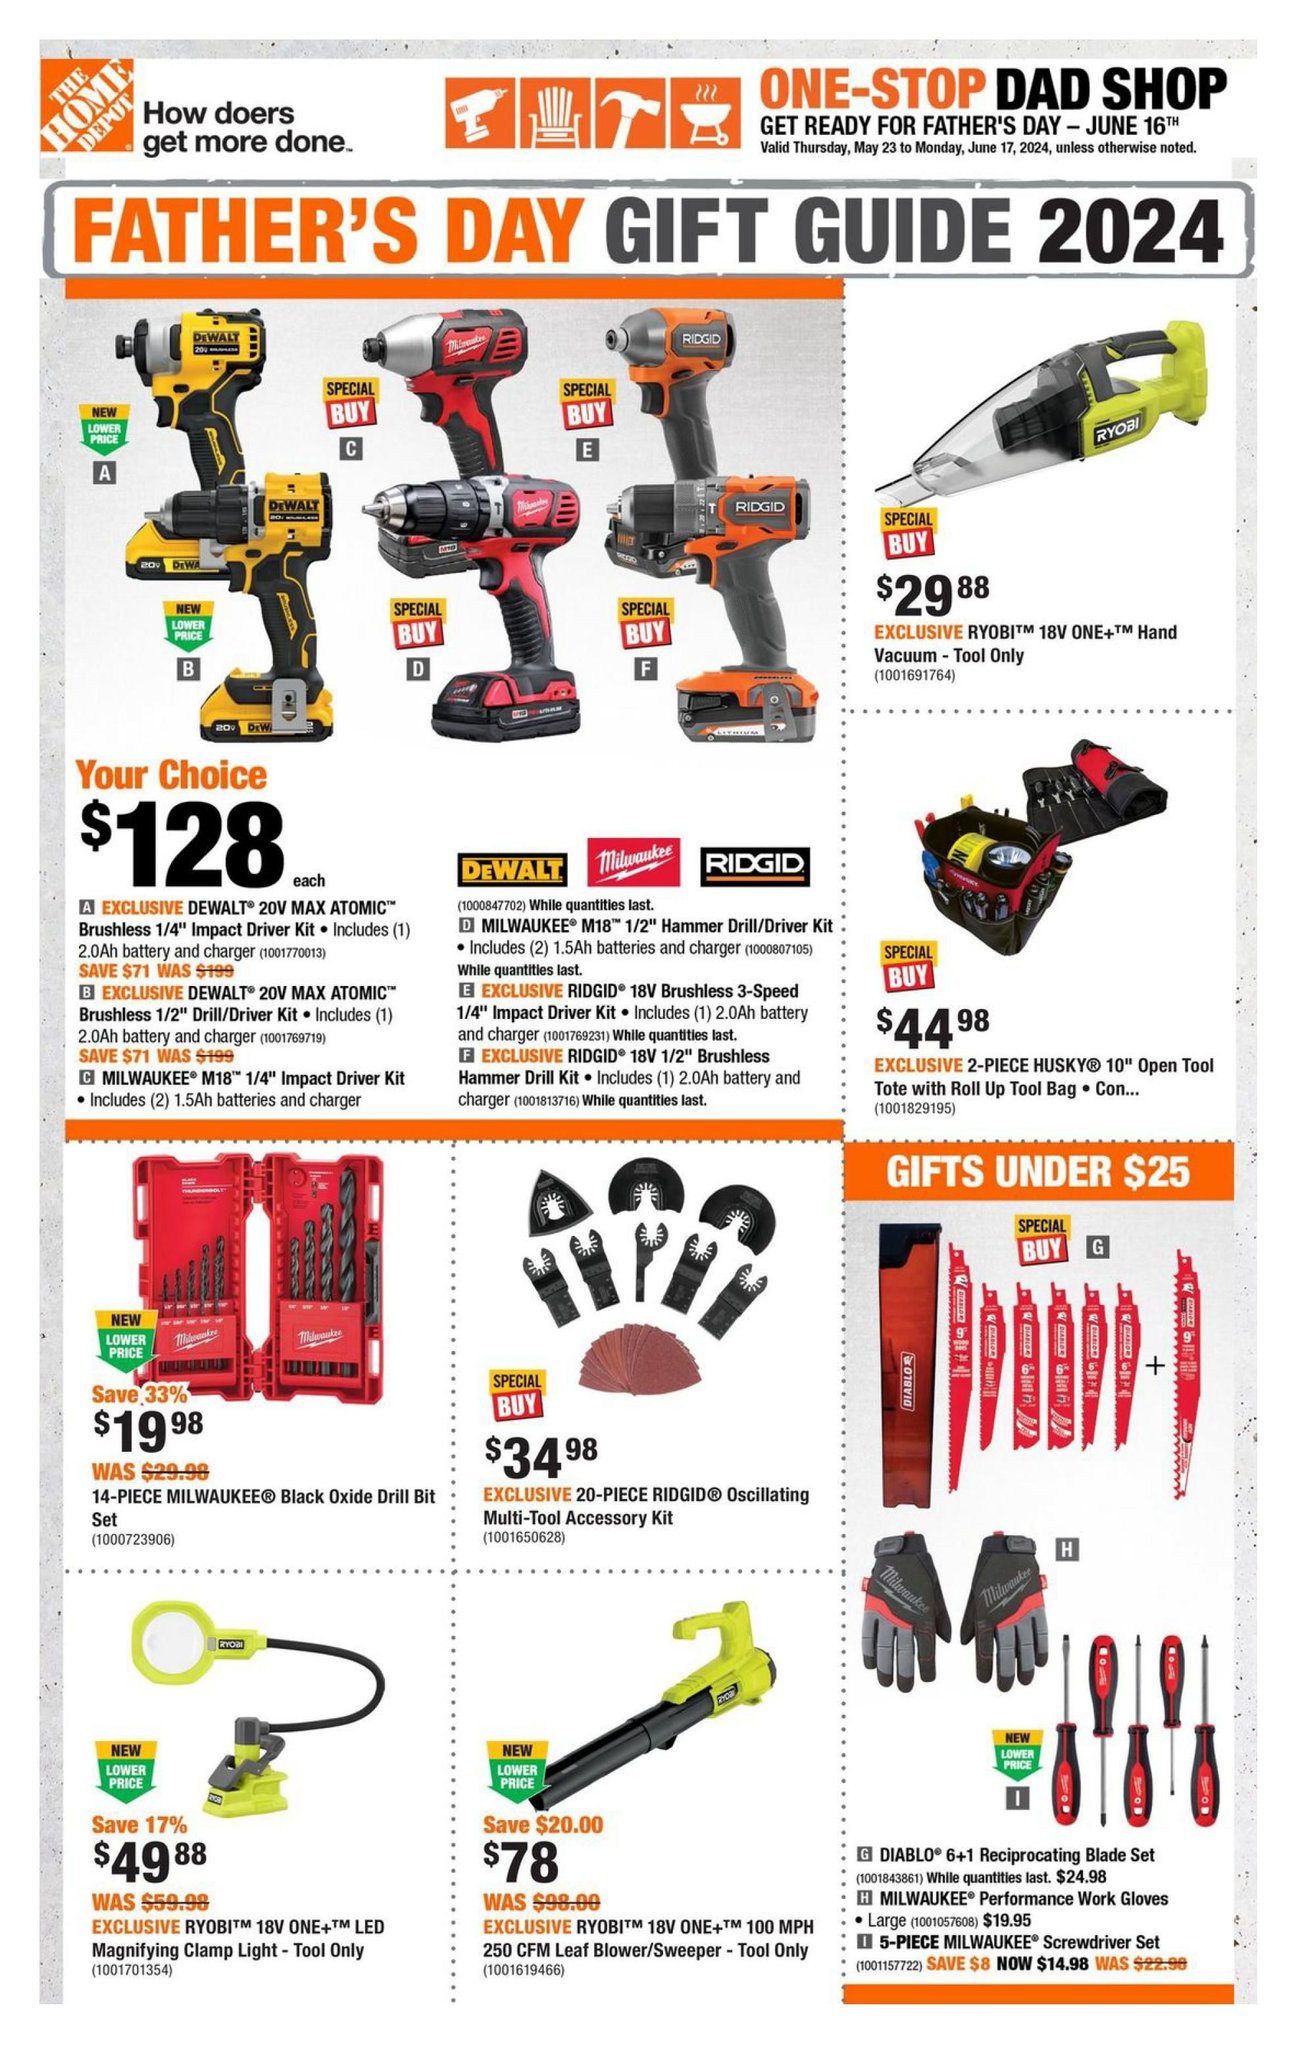 Home Depot - Father's Day Gift Guide - Page 1